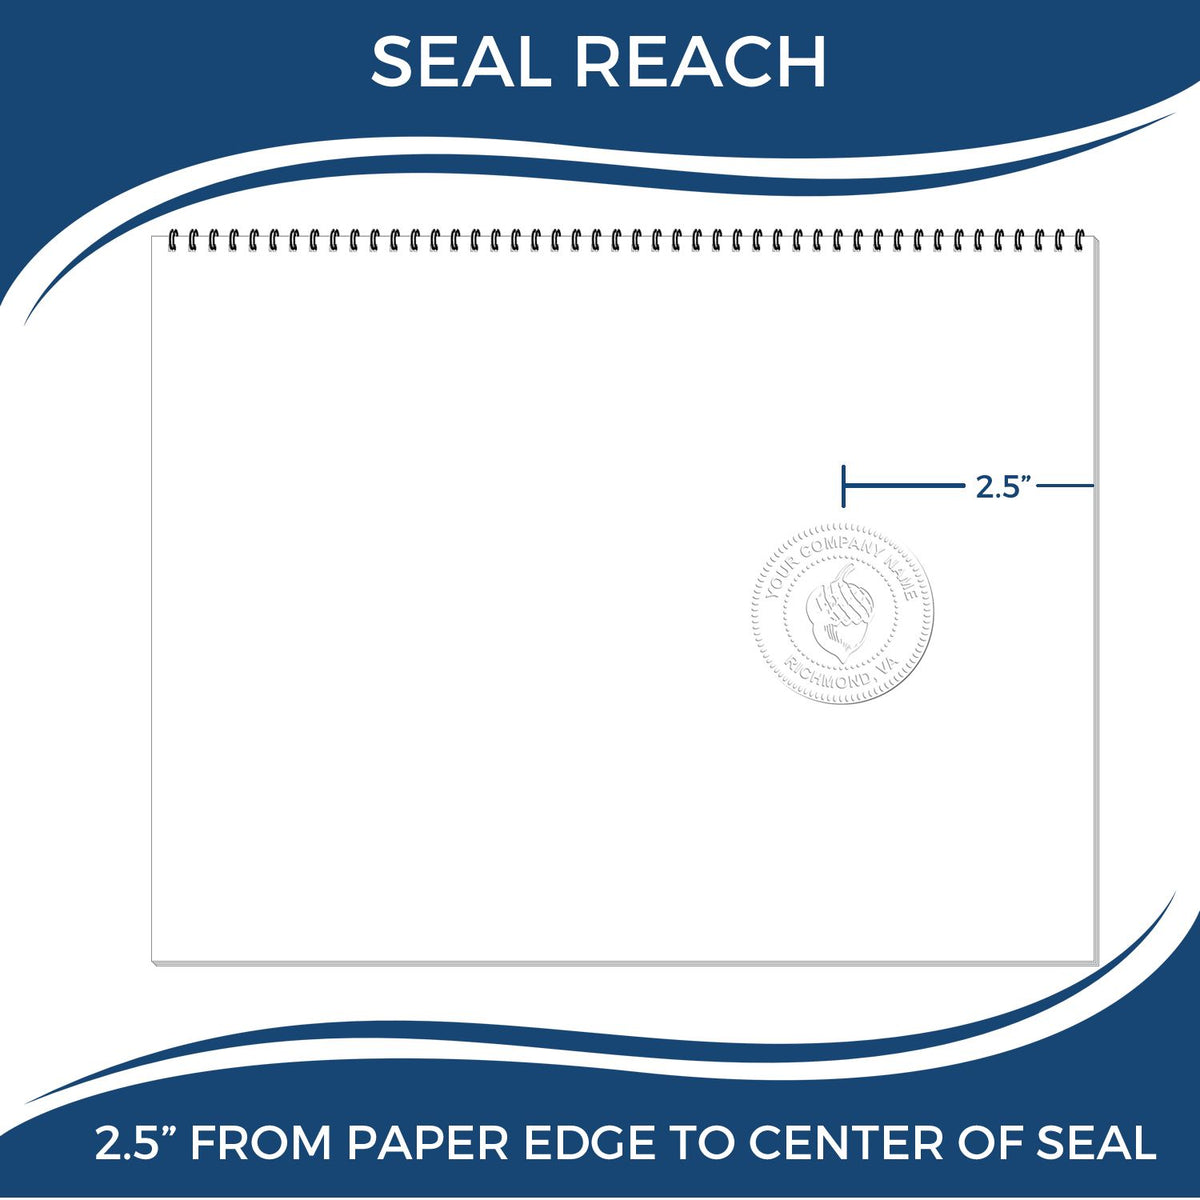 An infographic showing the seal reach which is represented by a ruler and a miniature seal image of the Heavy Duty Cast Iron Mississippi Engineer Seal Embosser